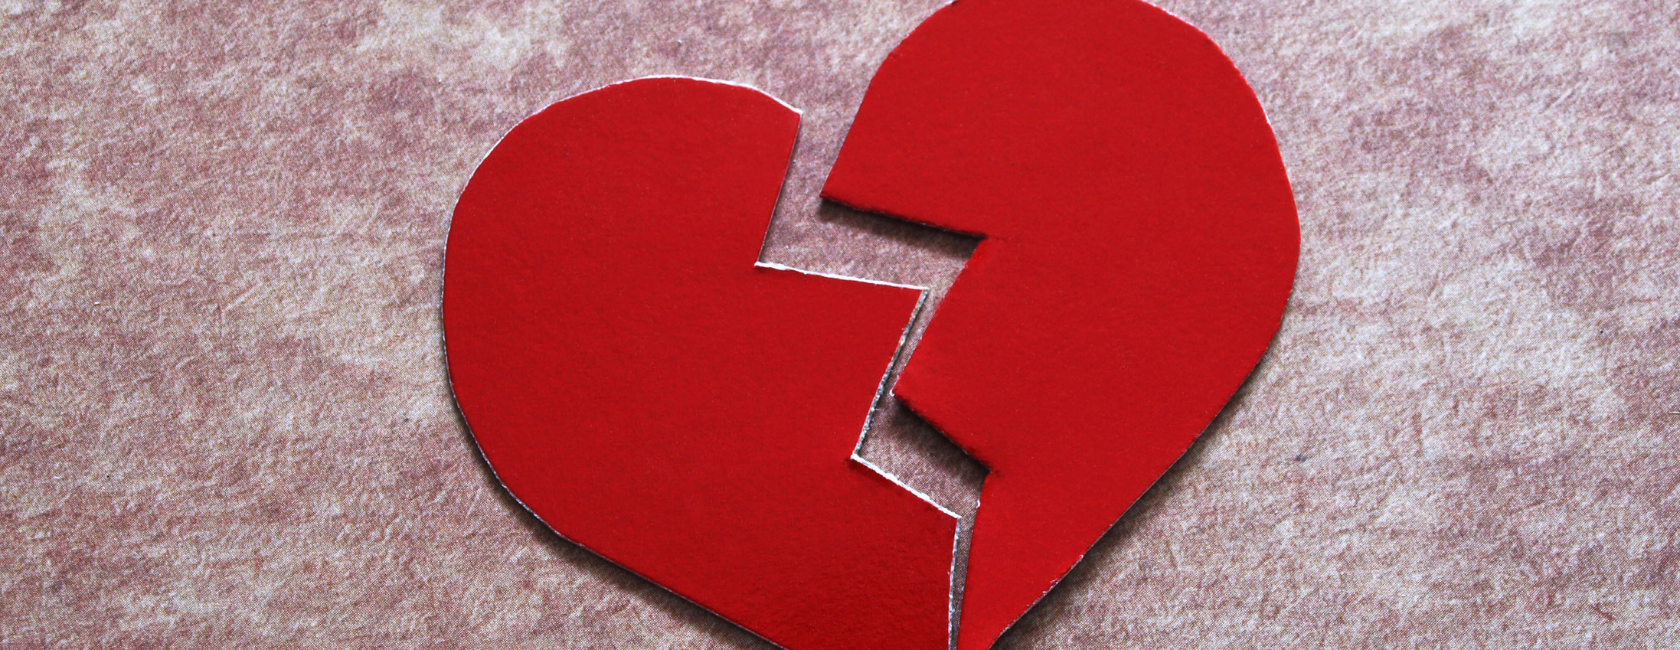 The heartbreaking fallout of financial infidelity